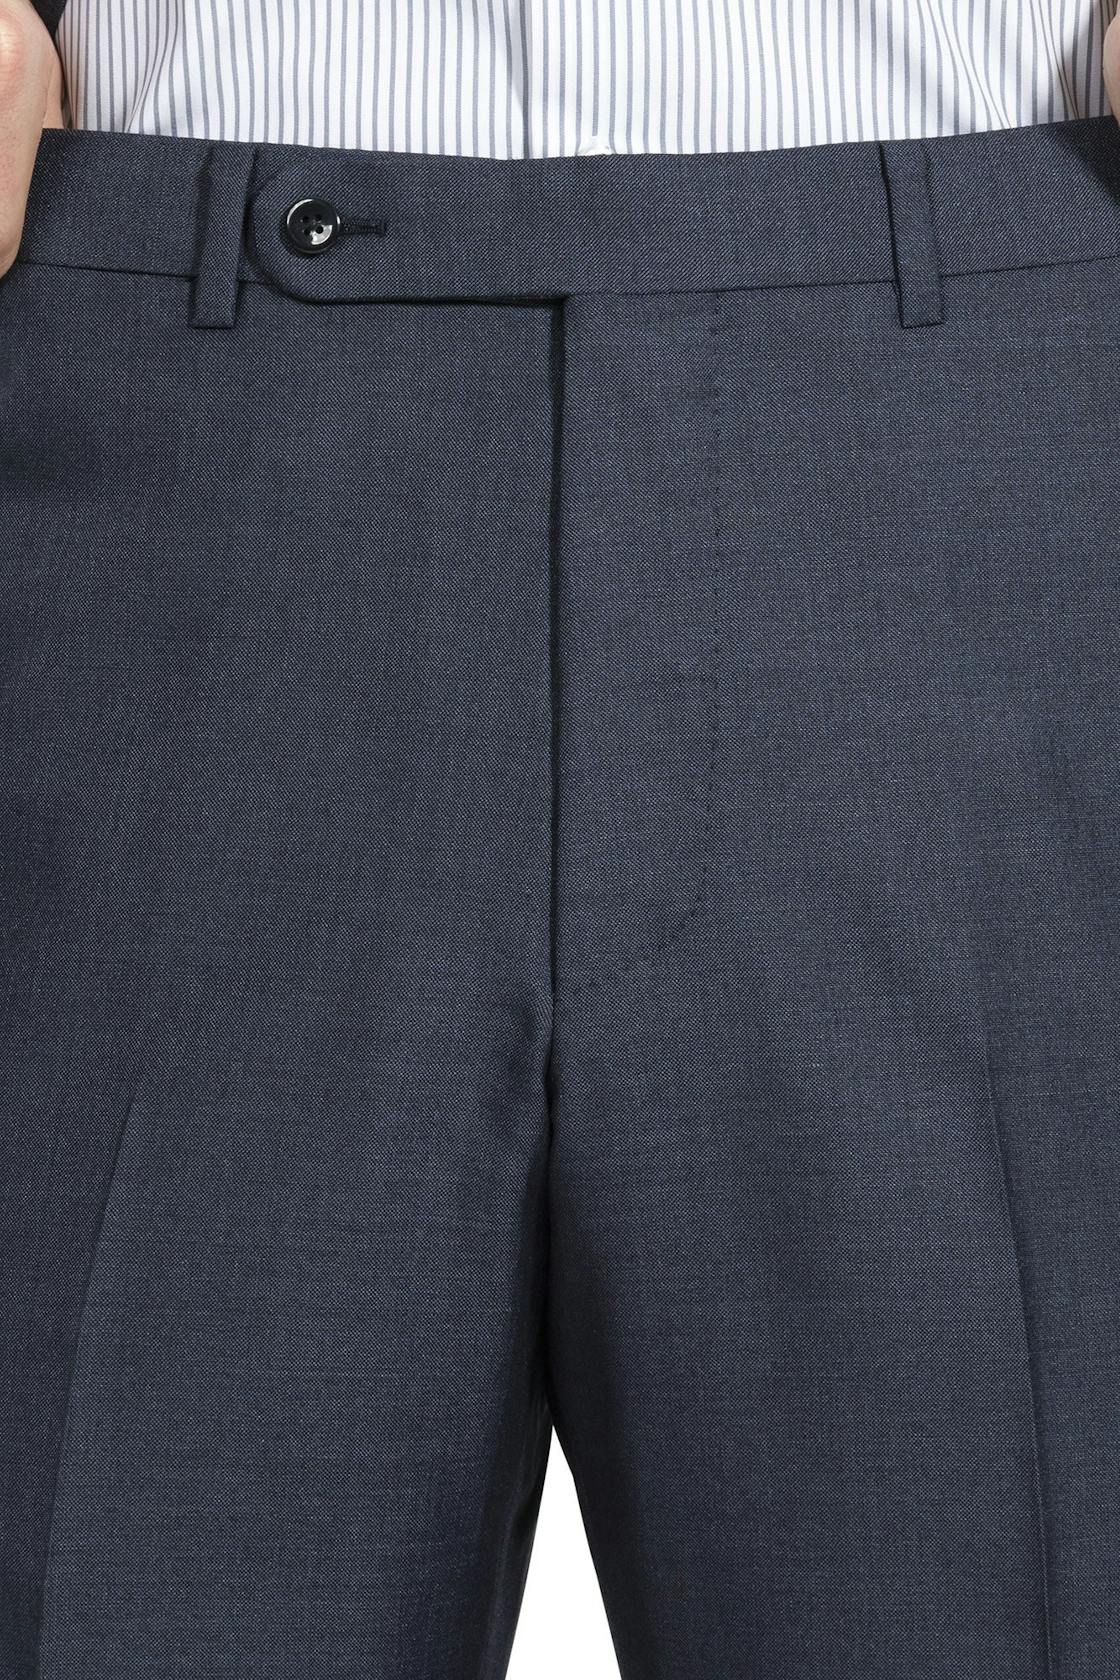 The Armoury by Ring Jacket Model 3A Slate Blue Wool/Silk Sharkskin Suit